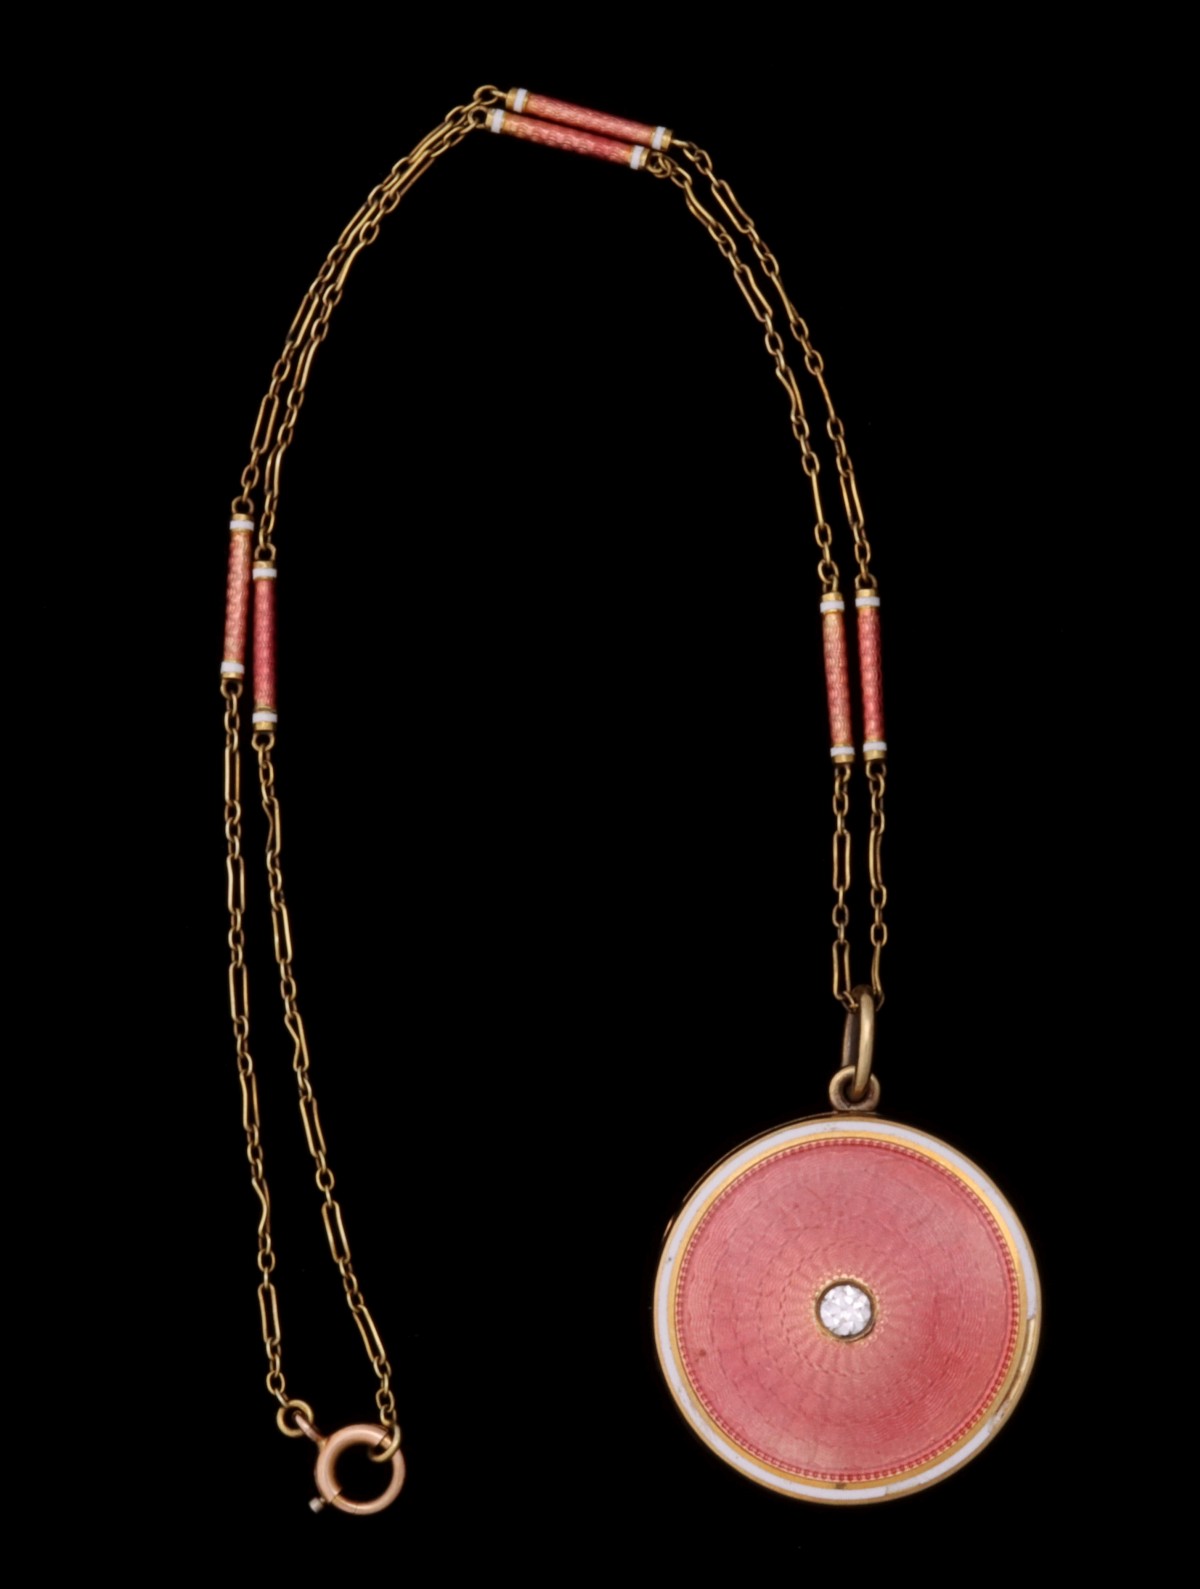 A 14K GOLD GUILLOCHE LOCKET WITH DIAMOND, AS IS